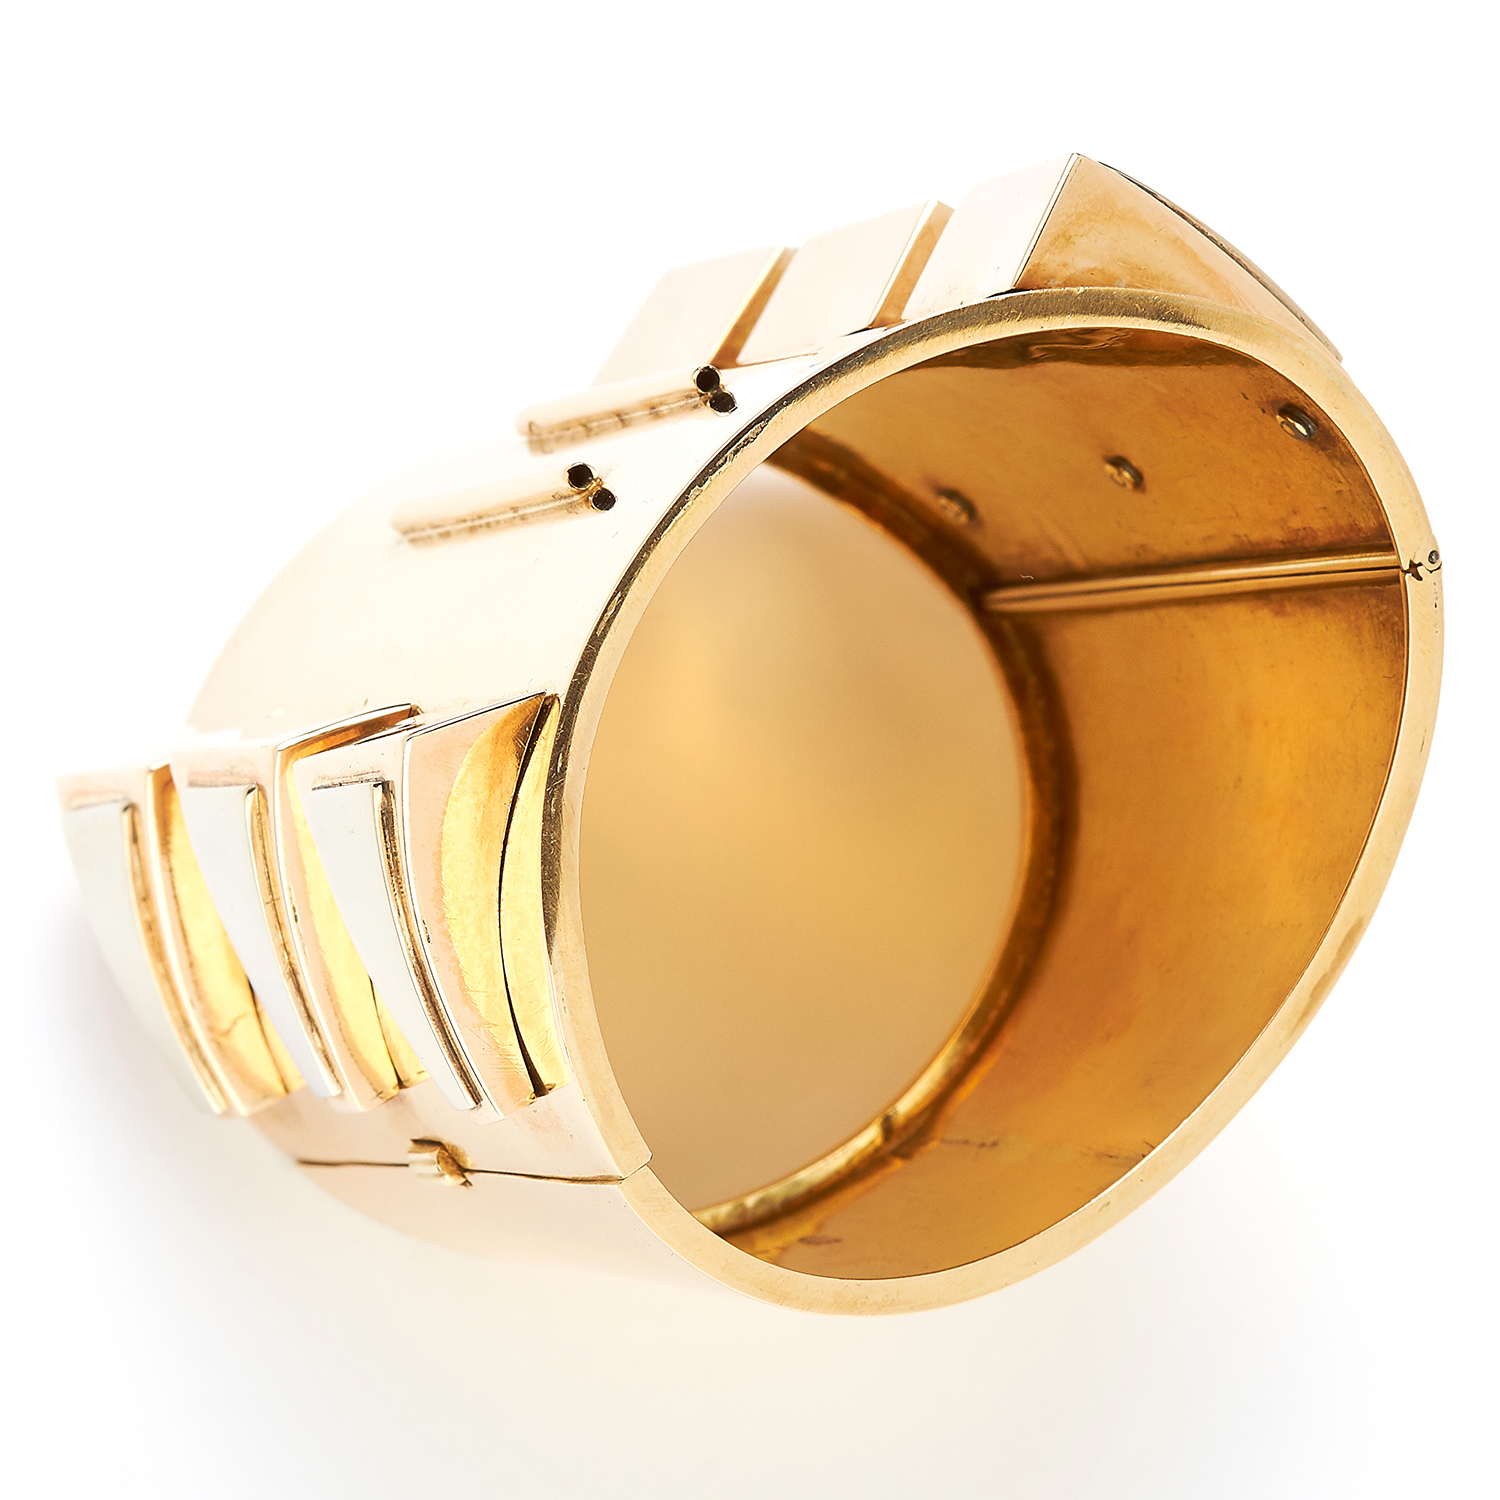 GOLD CUFF, FRENCH in high carat yellow gold, in abstract design, marked indistinctly, 191.5g. - Image 2 of 2